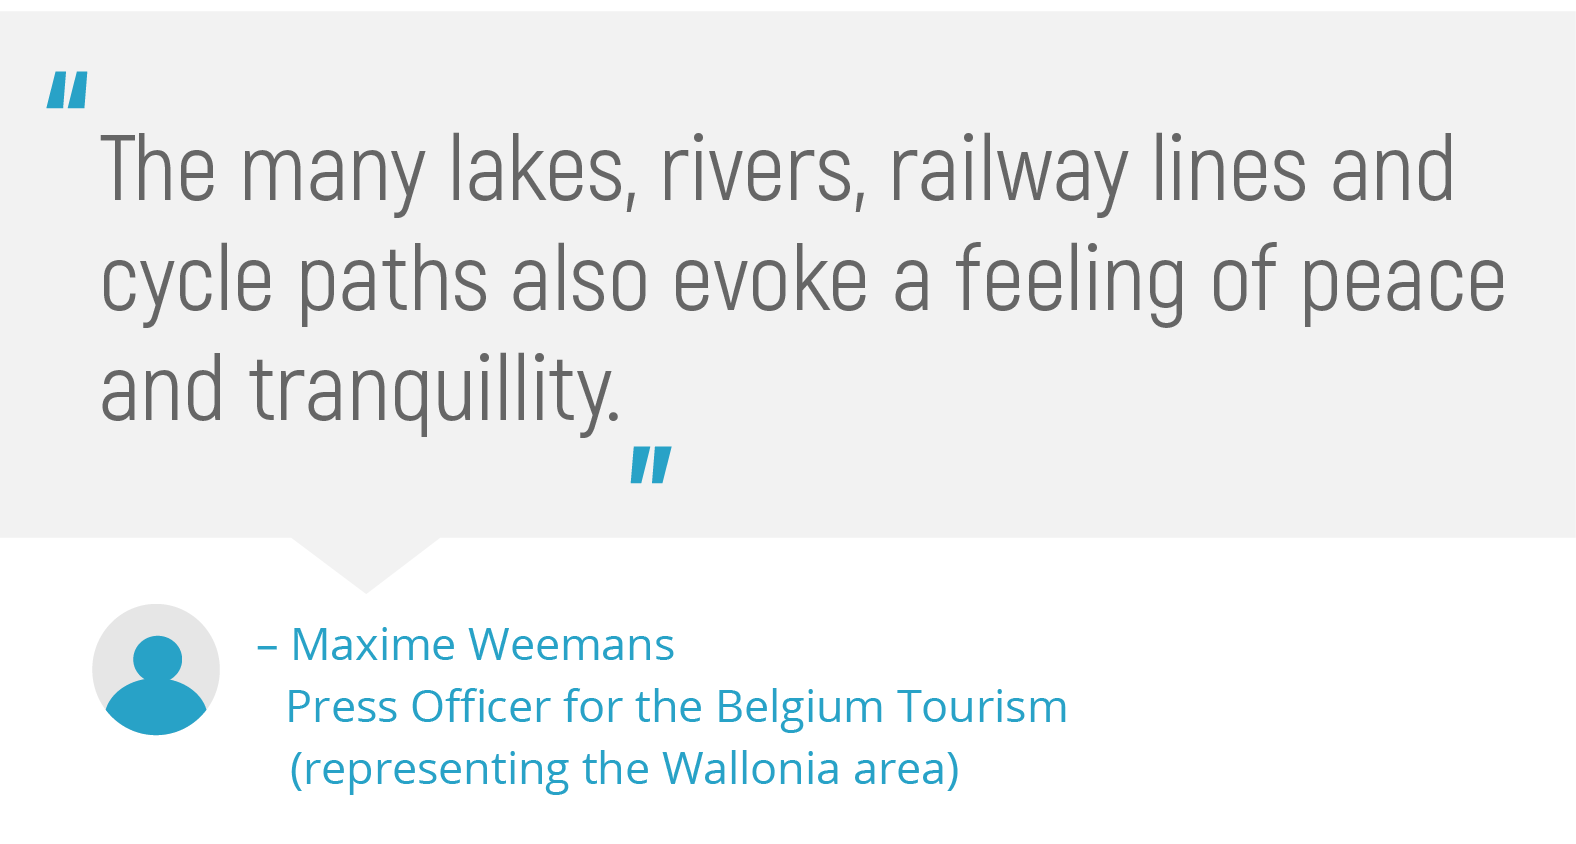 "The many lakes, rivers, railway lines and cycle paths evoke a feeling of peace and tranquillity."